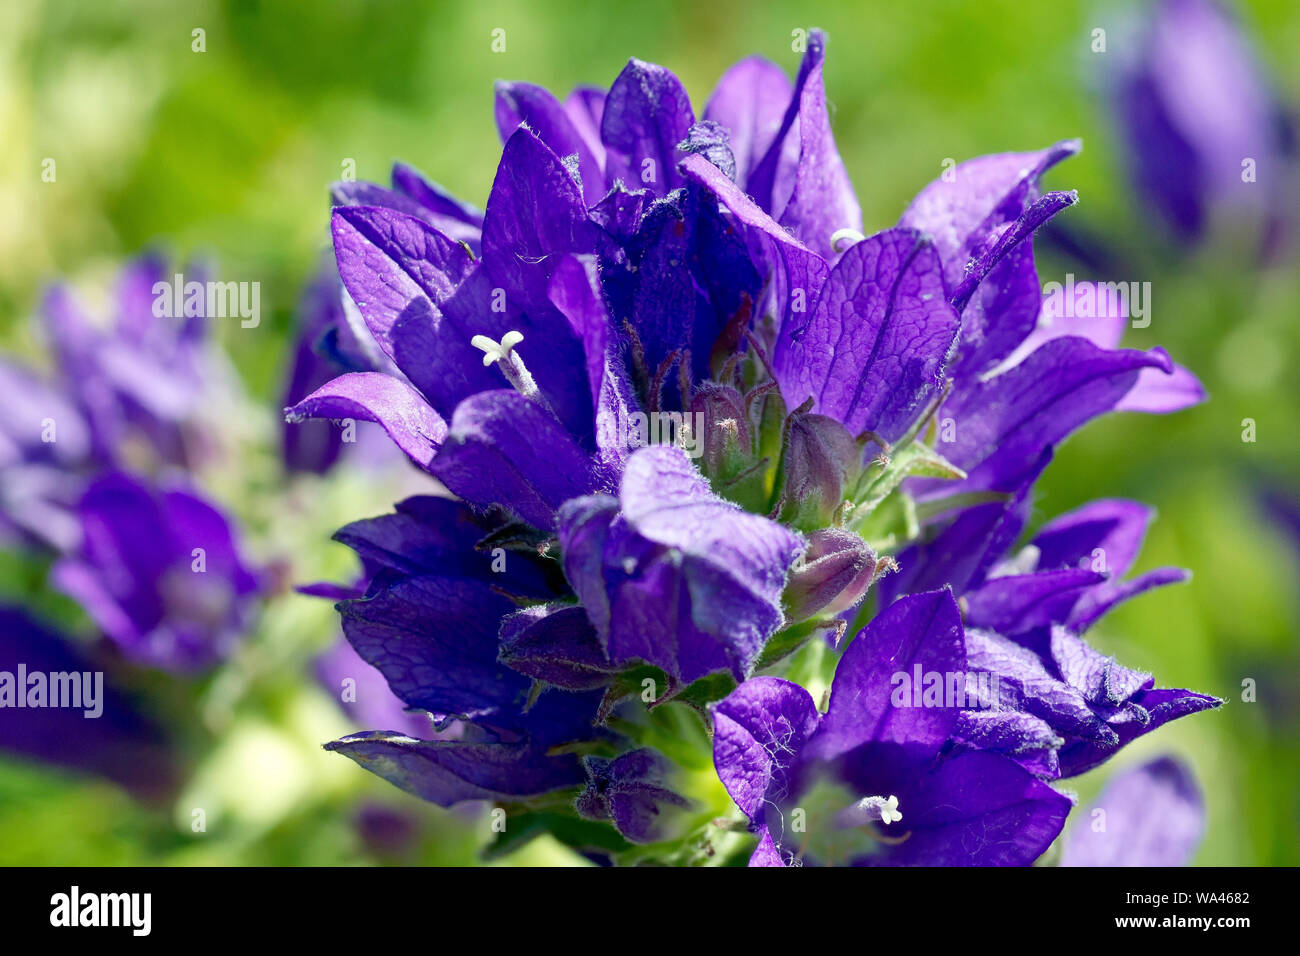 Clustered Bellflower (campanula glomerata), close up of the individual flowers and buds of the flower head. Stock Photo